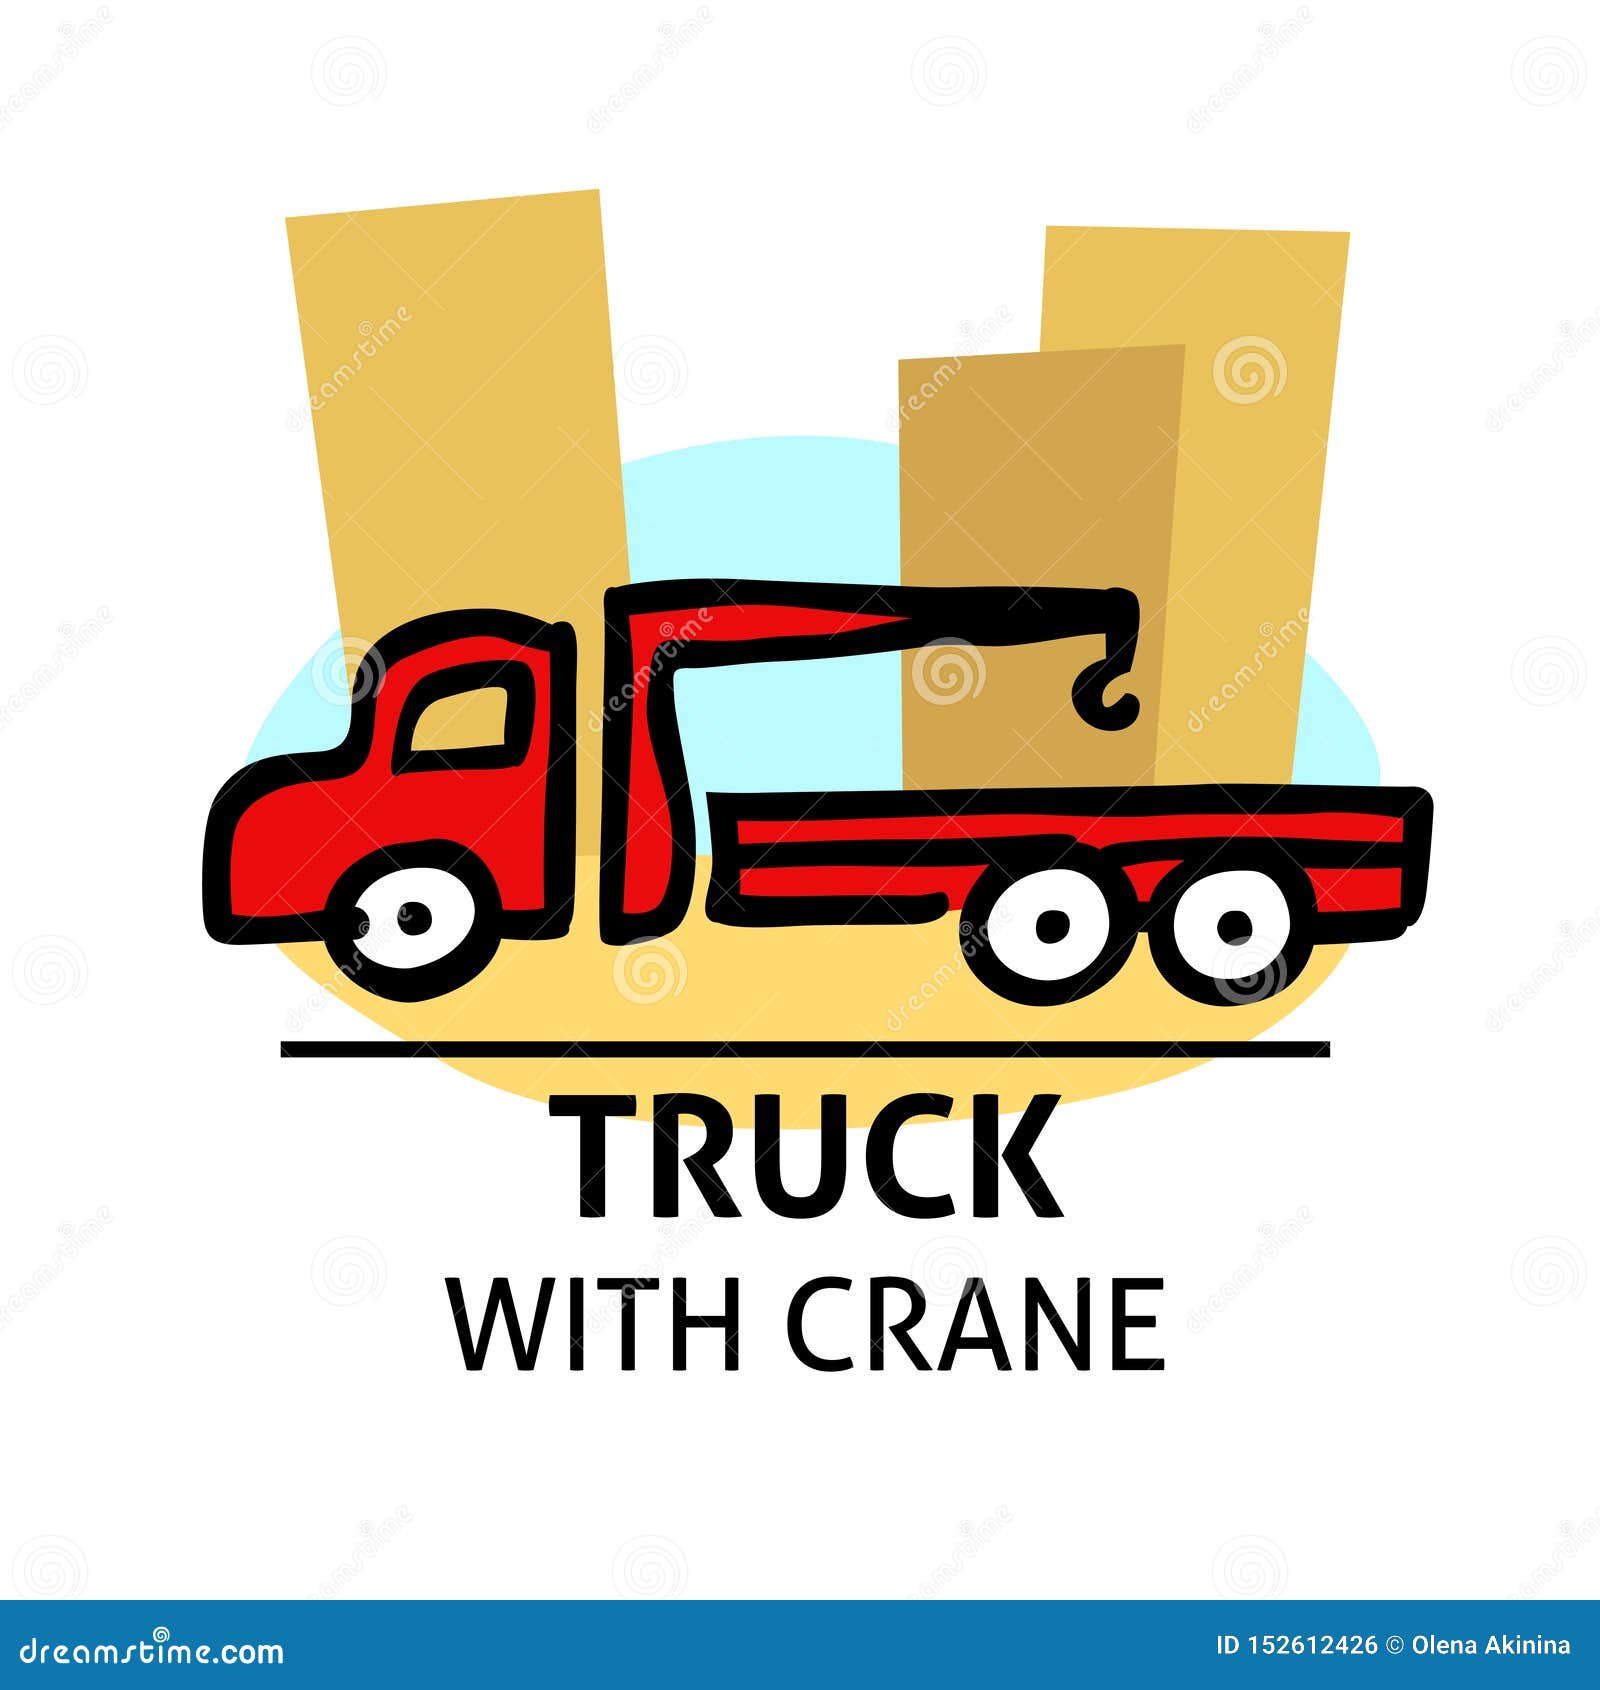 A Square Vector Image of a Truck with a Crane on a Building. Outline Doodle  Illustration Stock Vector - Illustration of design, freehand: 152612426